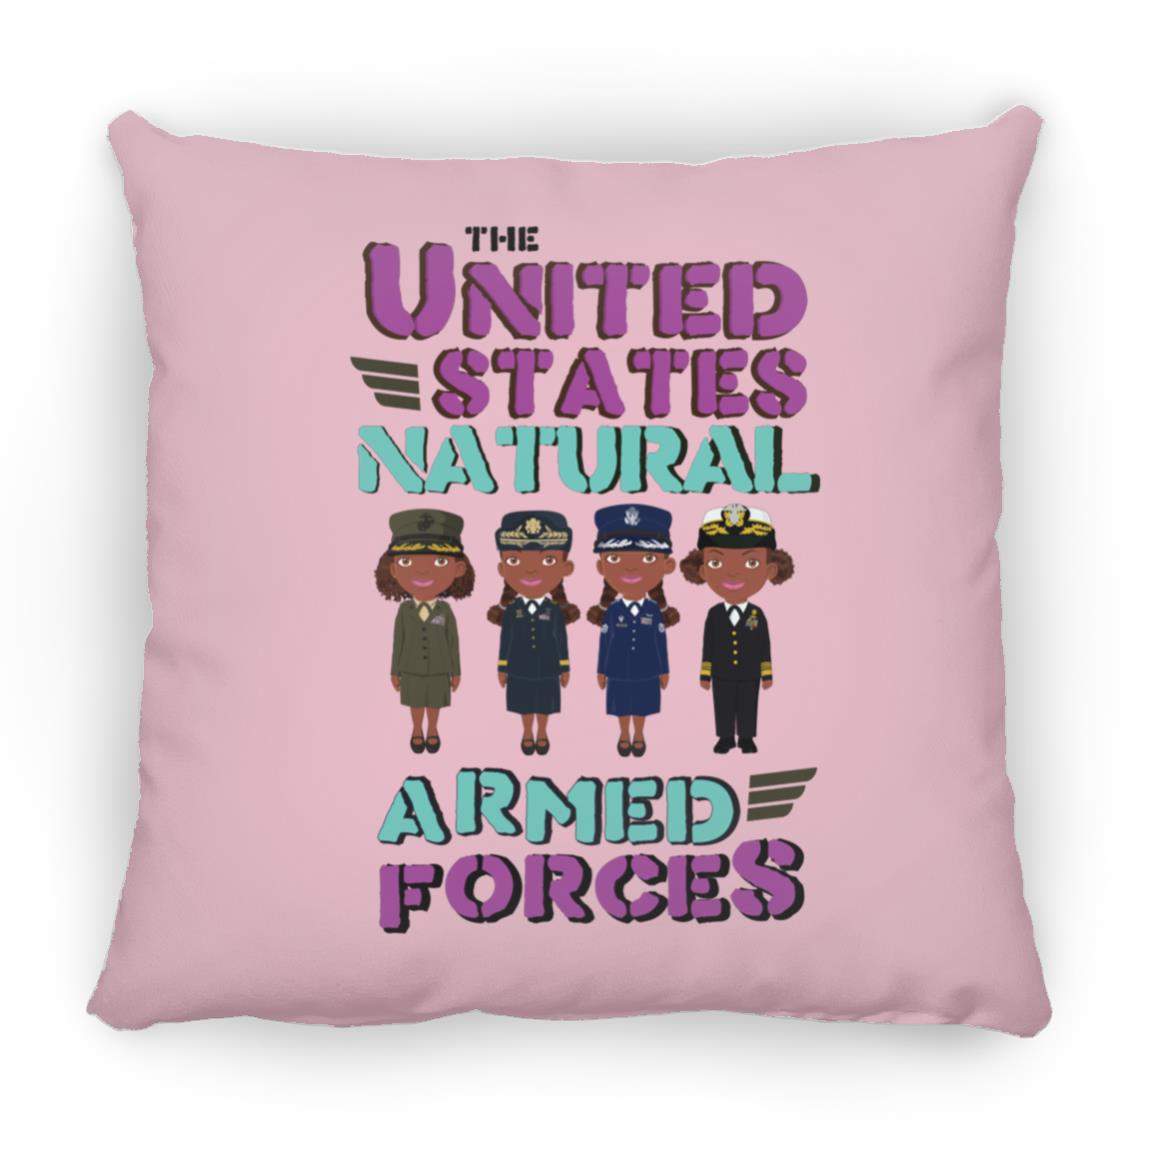 Armed Forces Pillow 16x16-CustomCat-Accessories,Armed Forces with Awesome Hair,Housewares,Pillows,Shop